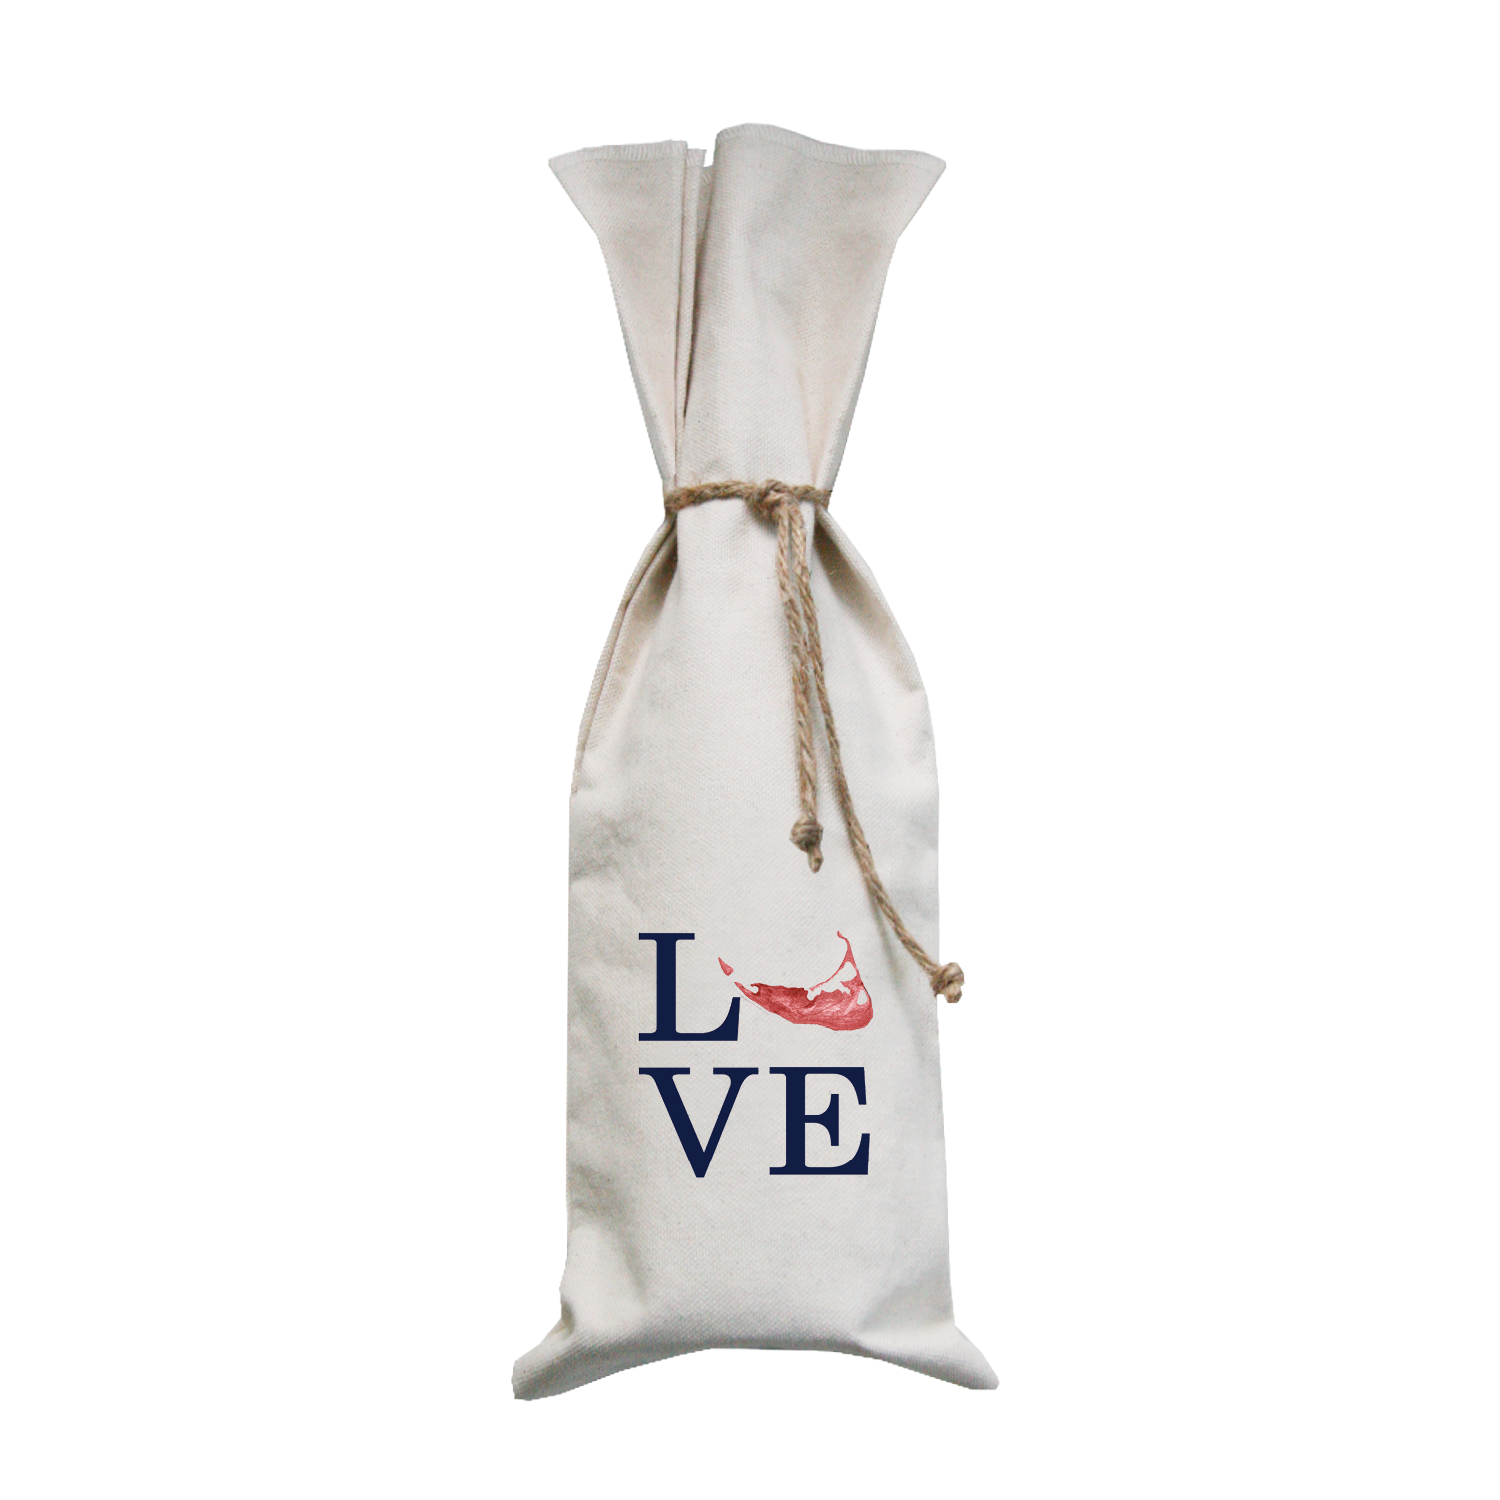 love nantucket island navy text with red island wine bag